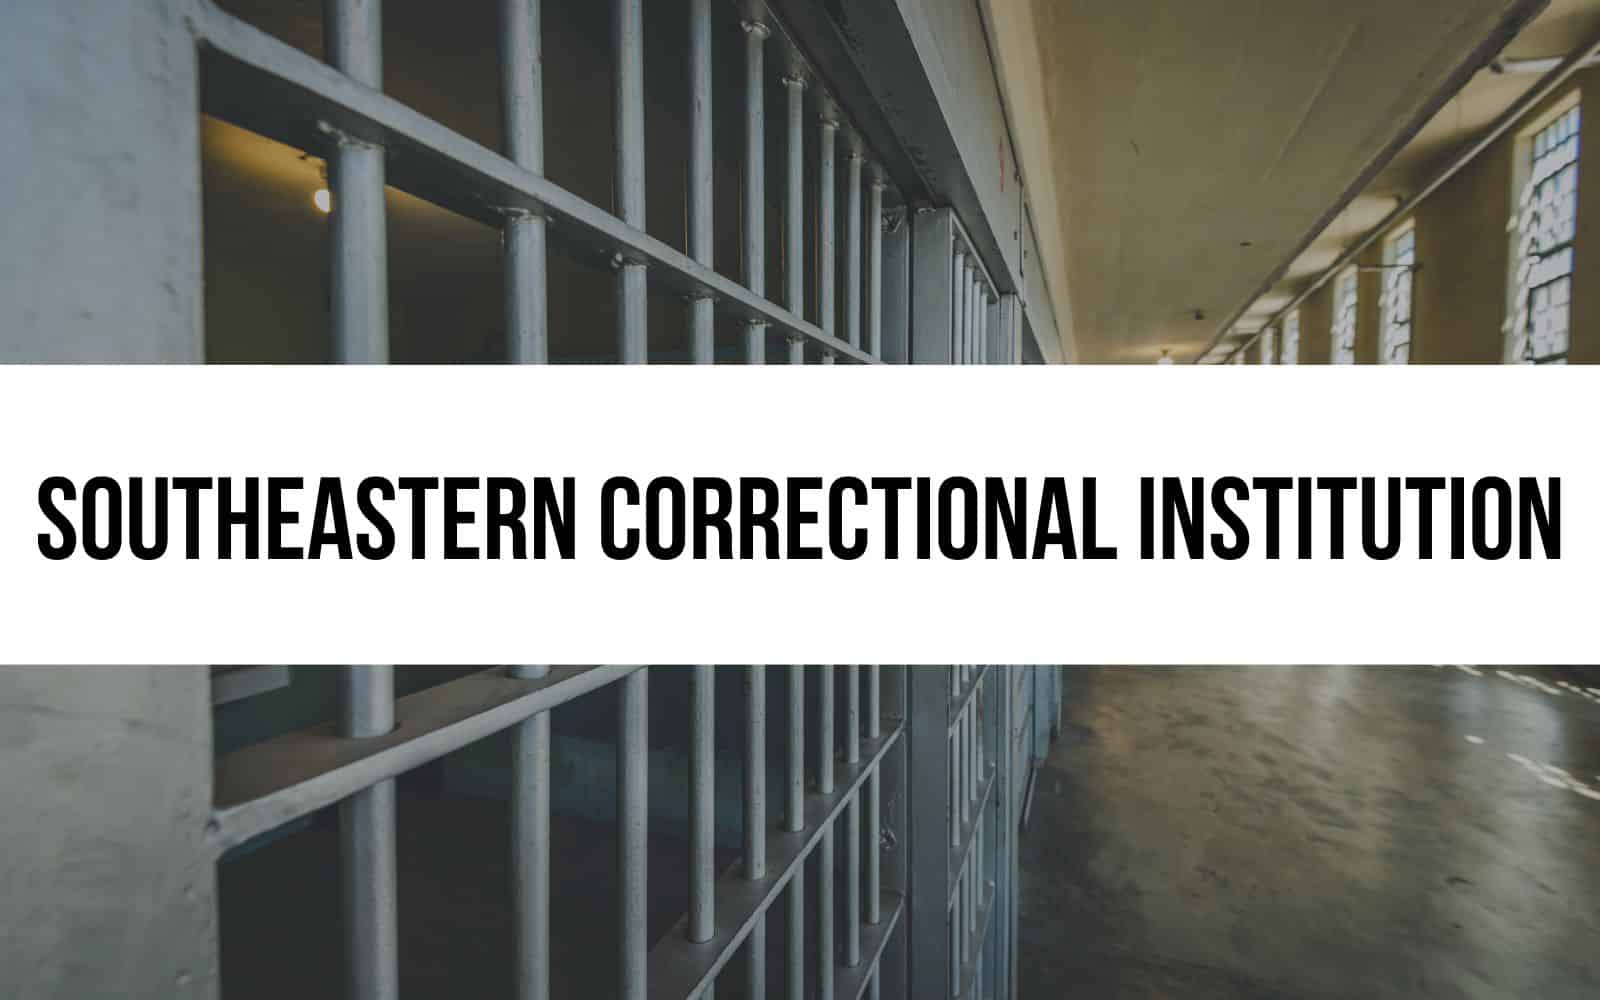 Southeastern Correctional Institution